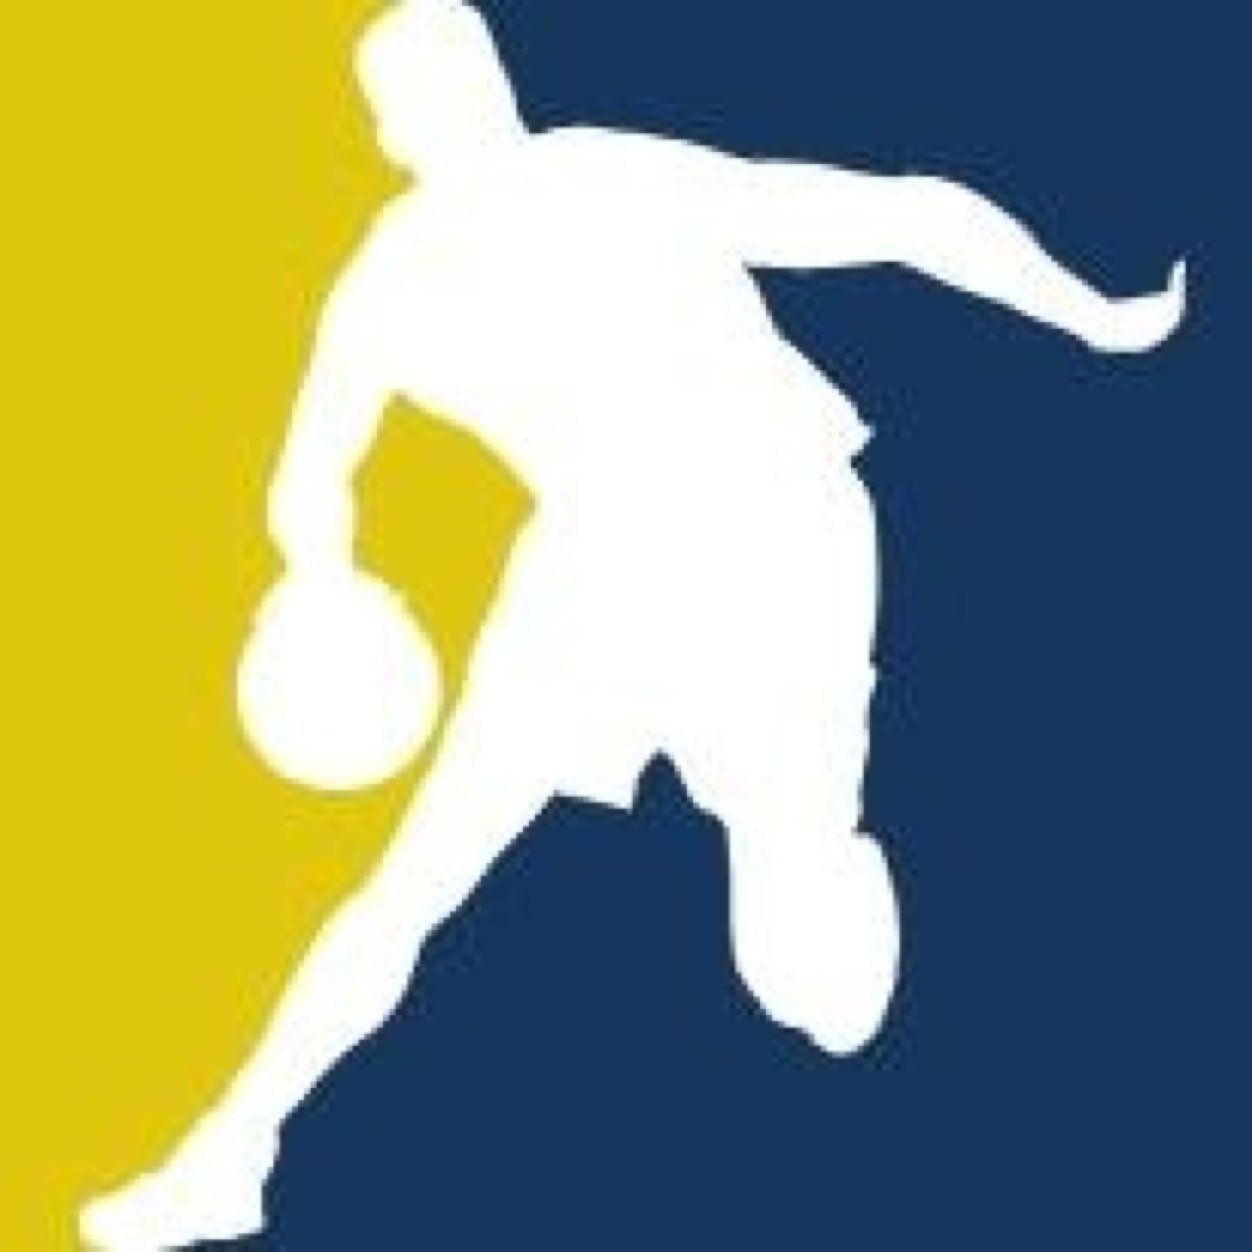 Official Twitter Account of the Eight Foot League